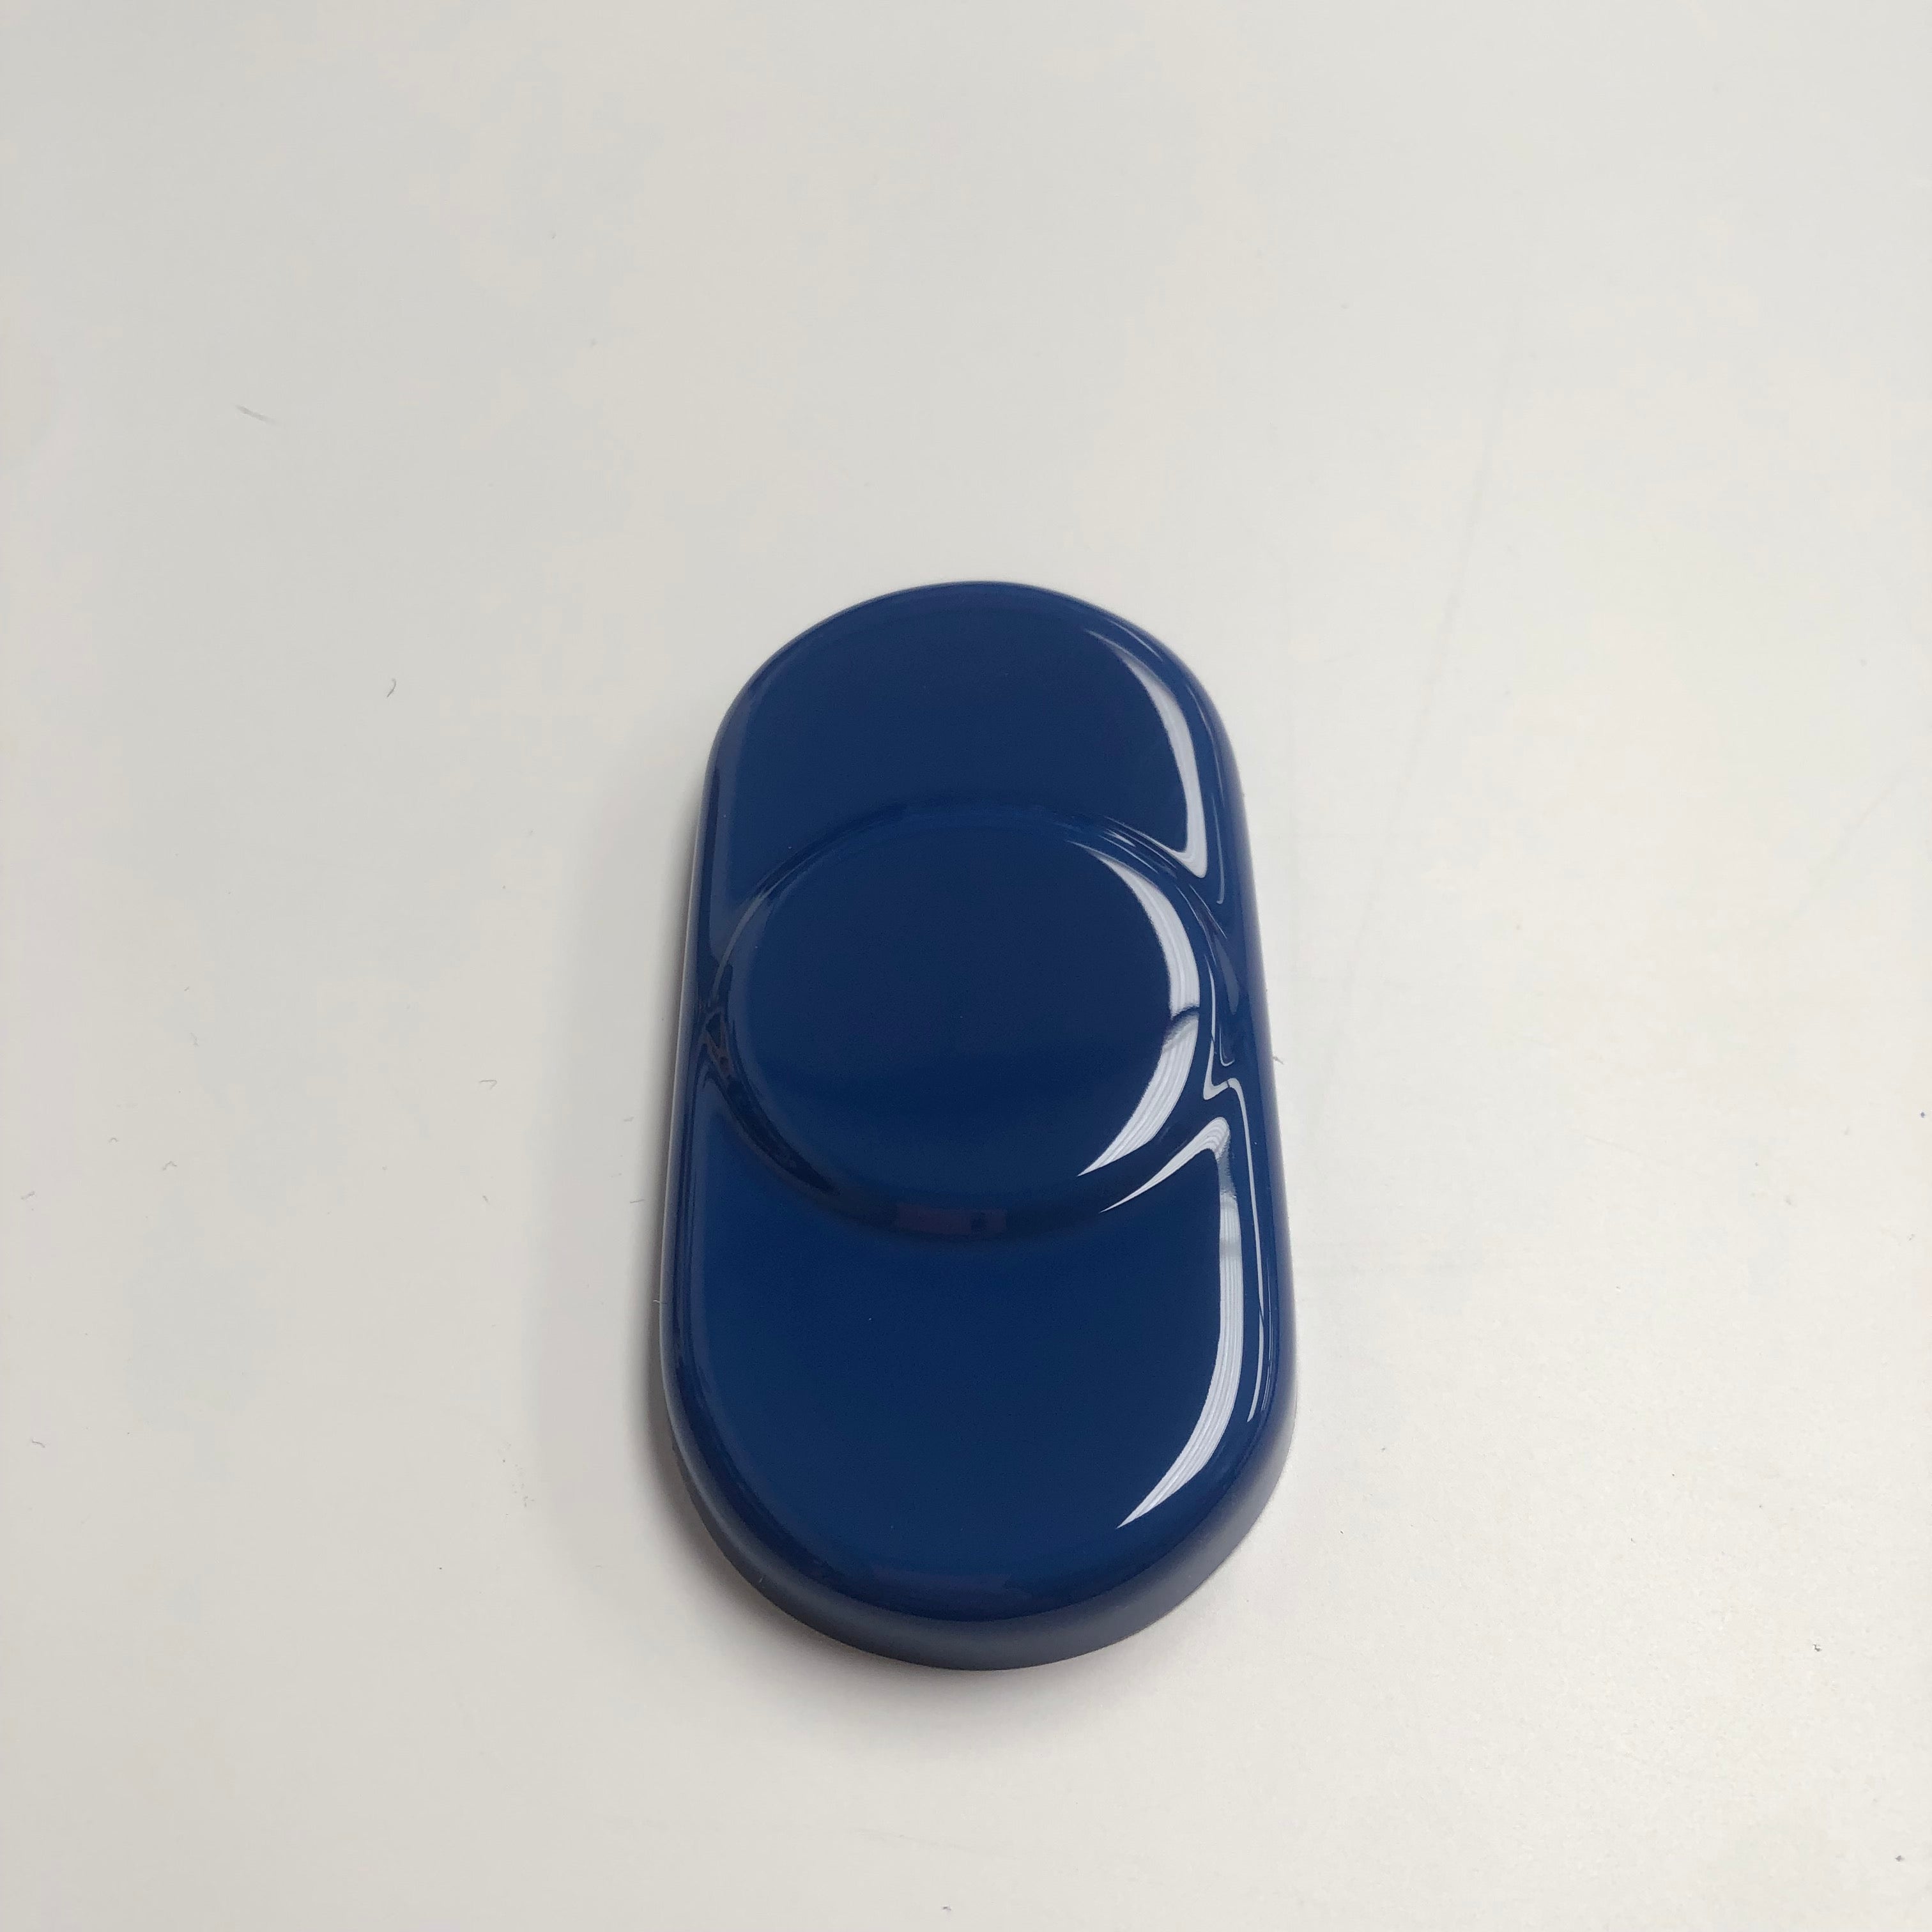 Proform Screen Washer Bottle Cap Cover - Ford Focus Mk1 (Plastic Finishes)